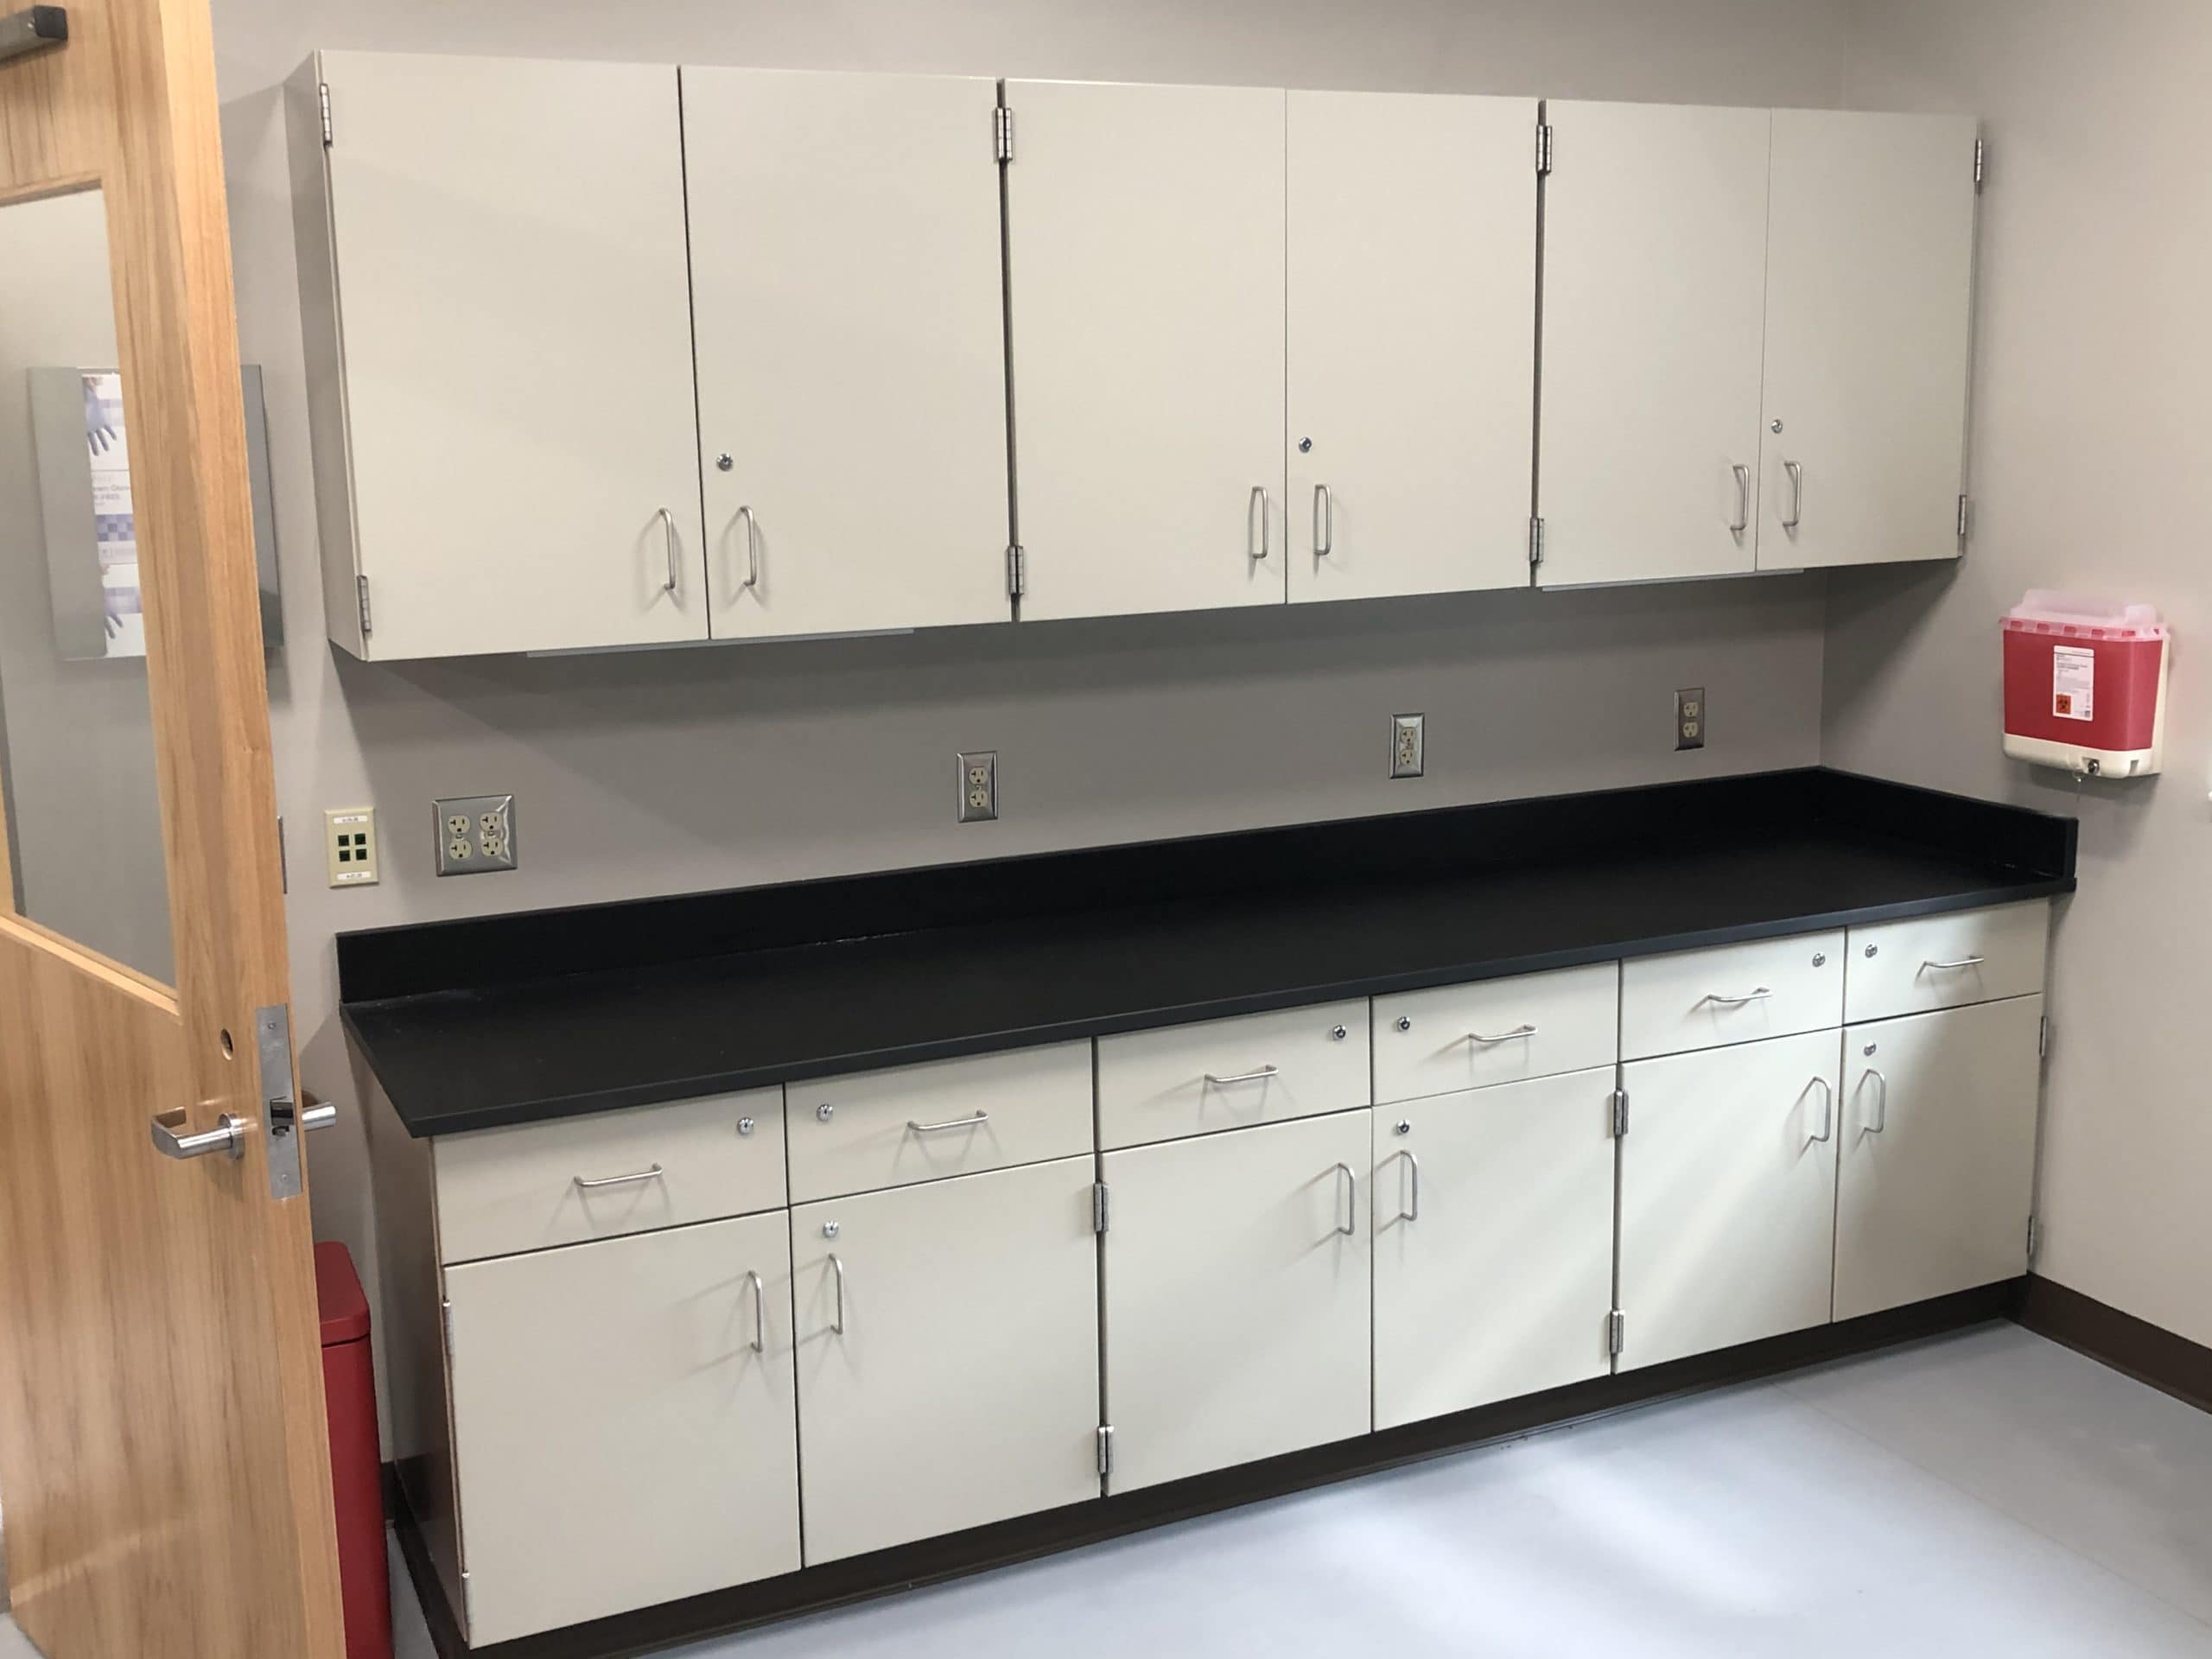 Max Resistance 2 lab work surfaces form Fundermax for the Wisconsin Indianhead Technical College Veterinary Technician Lab